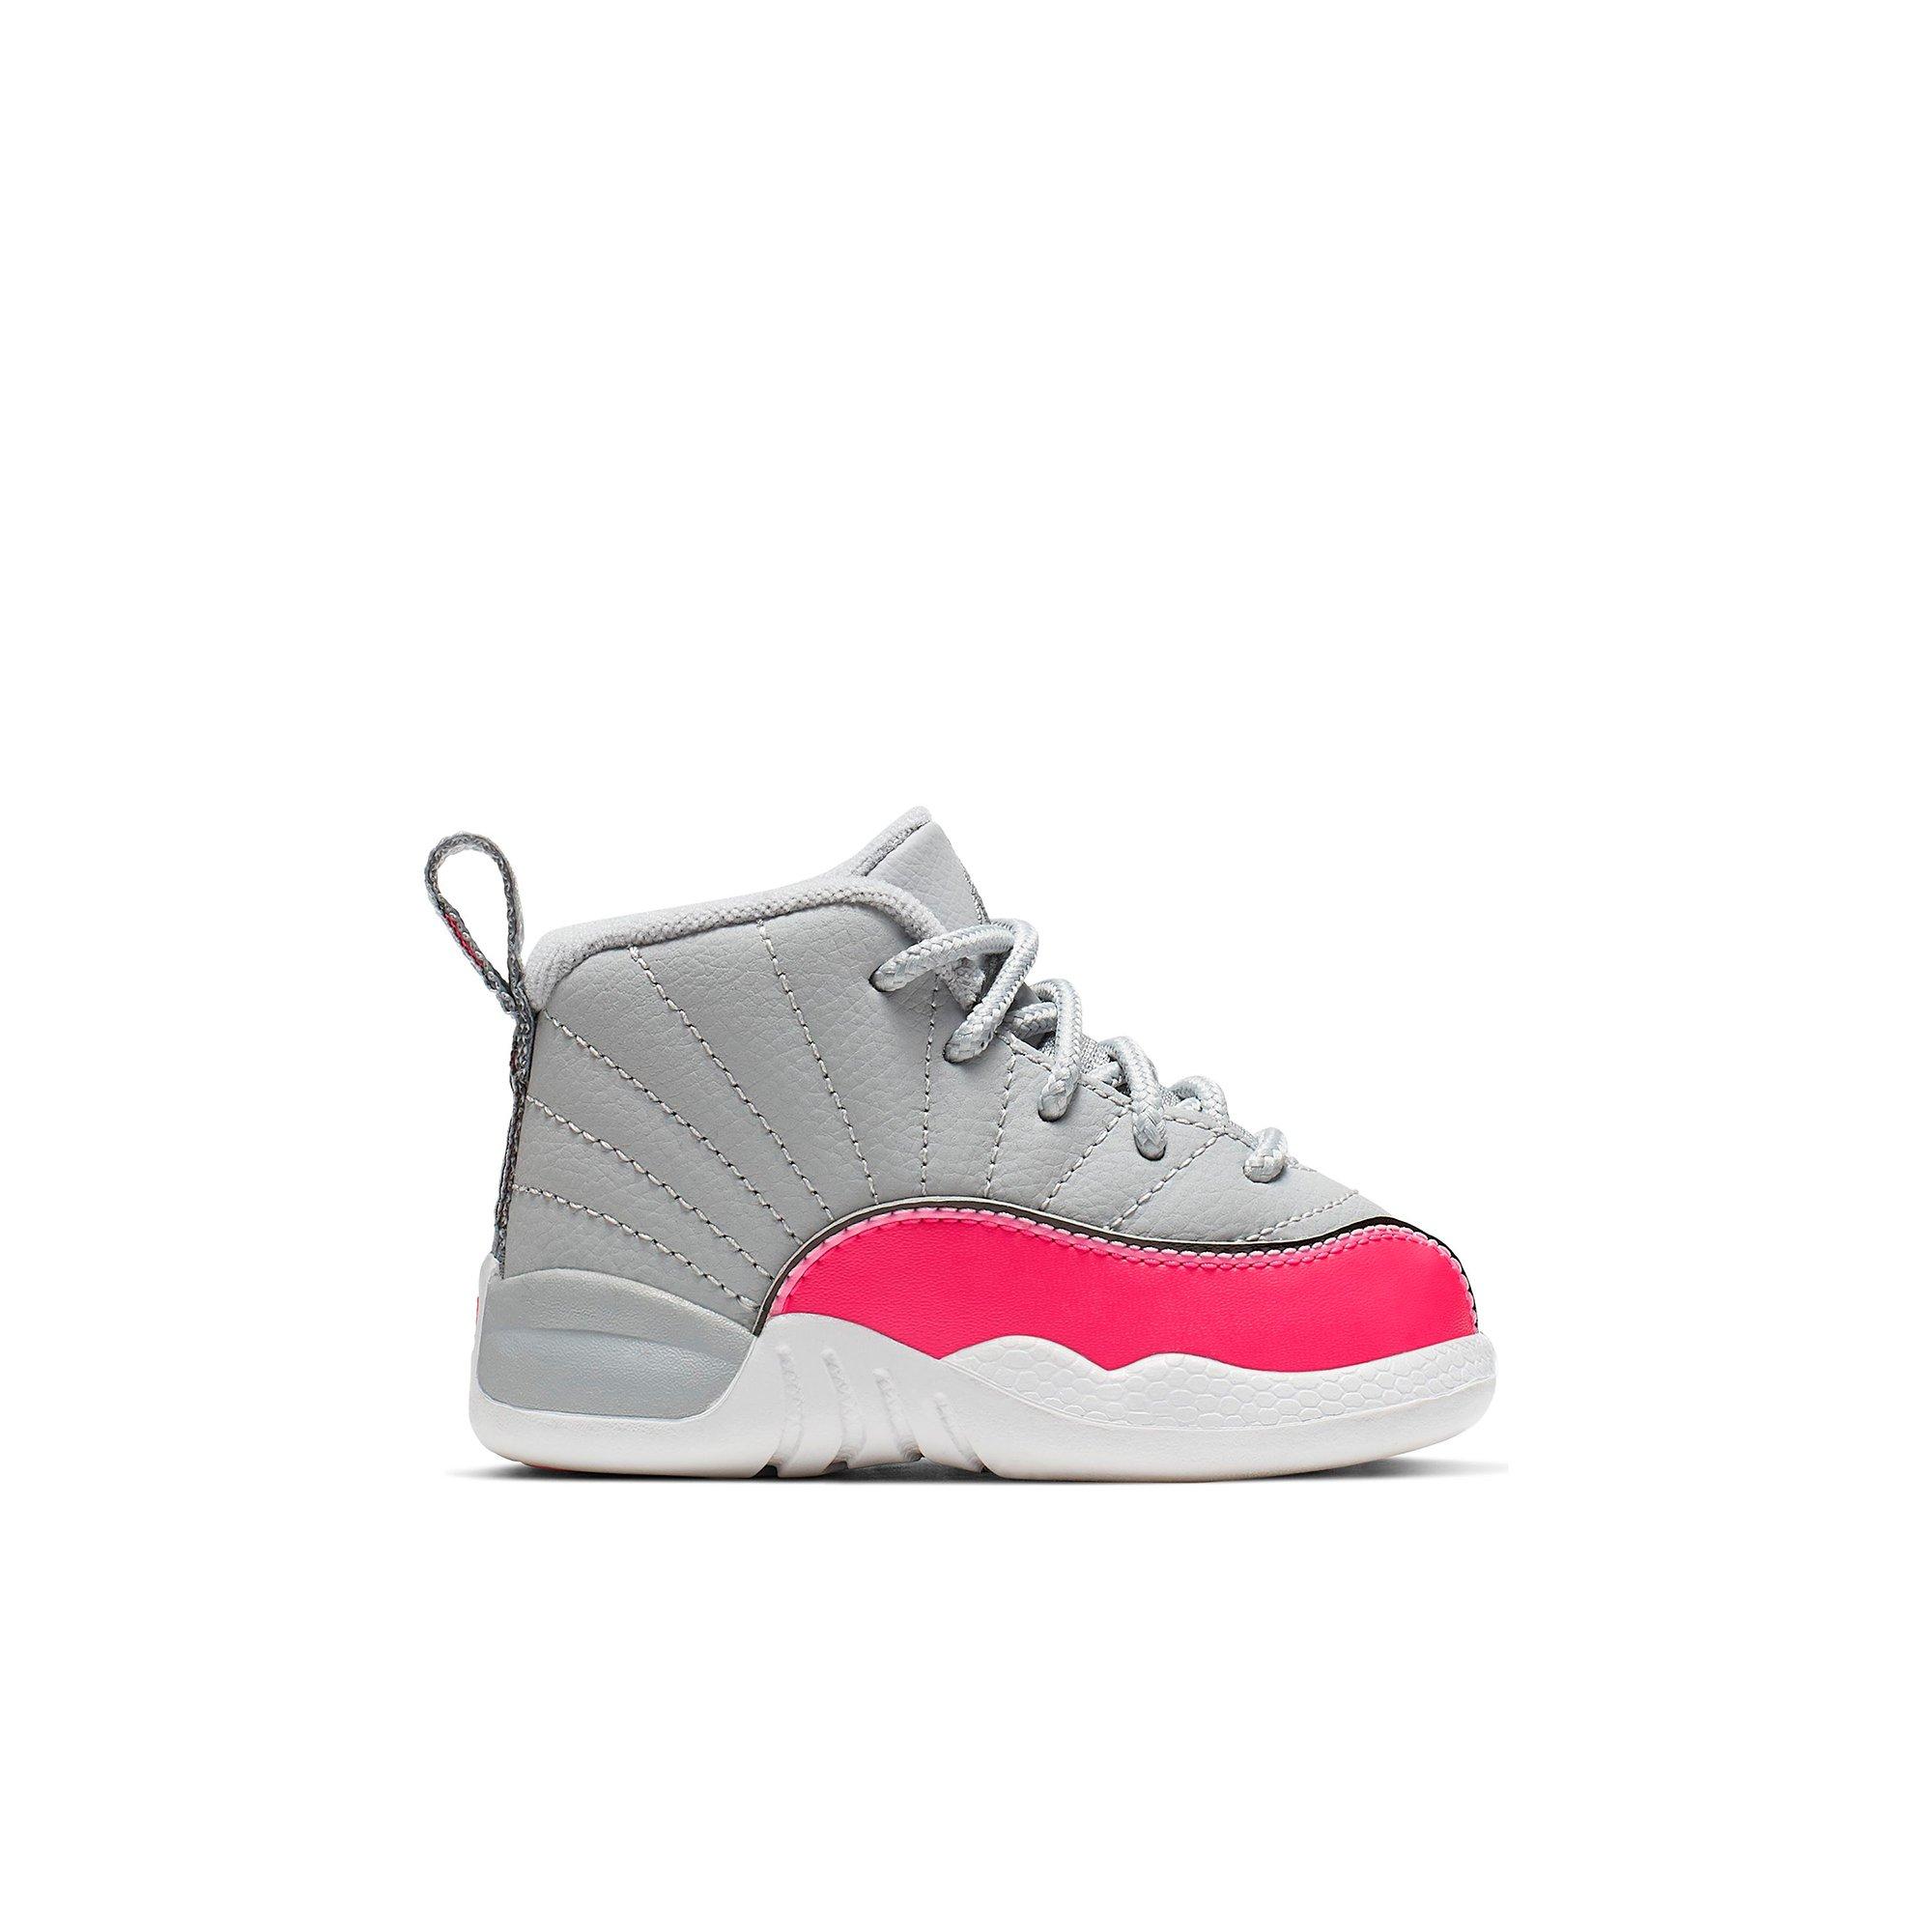 pink and white baby jordans